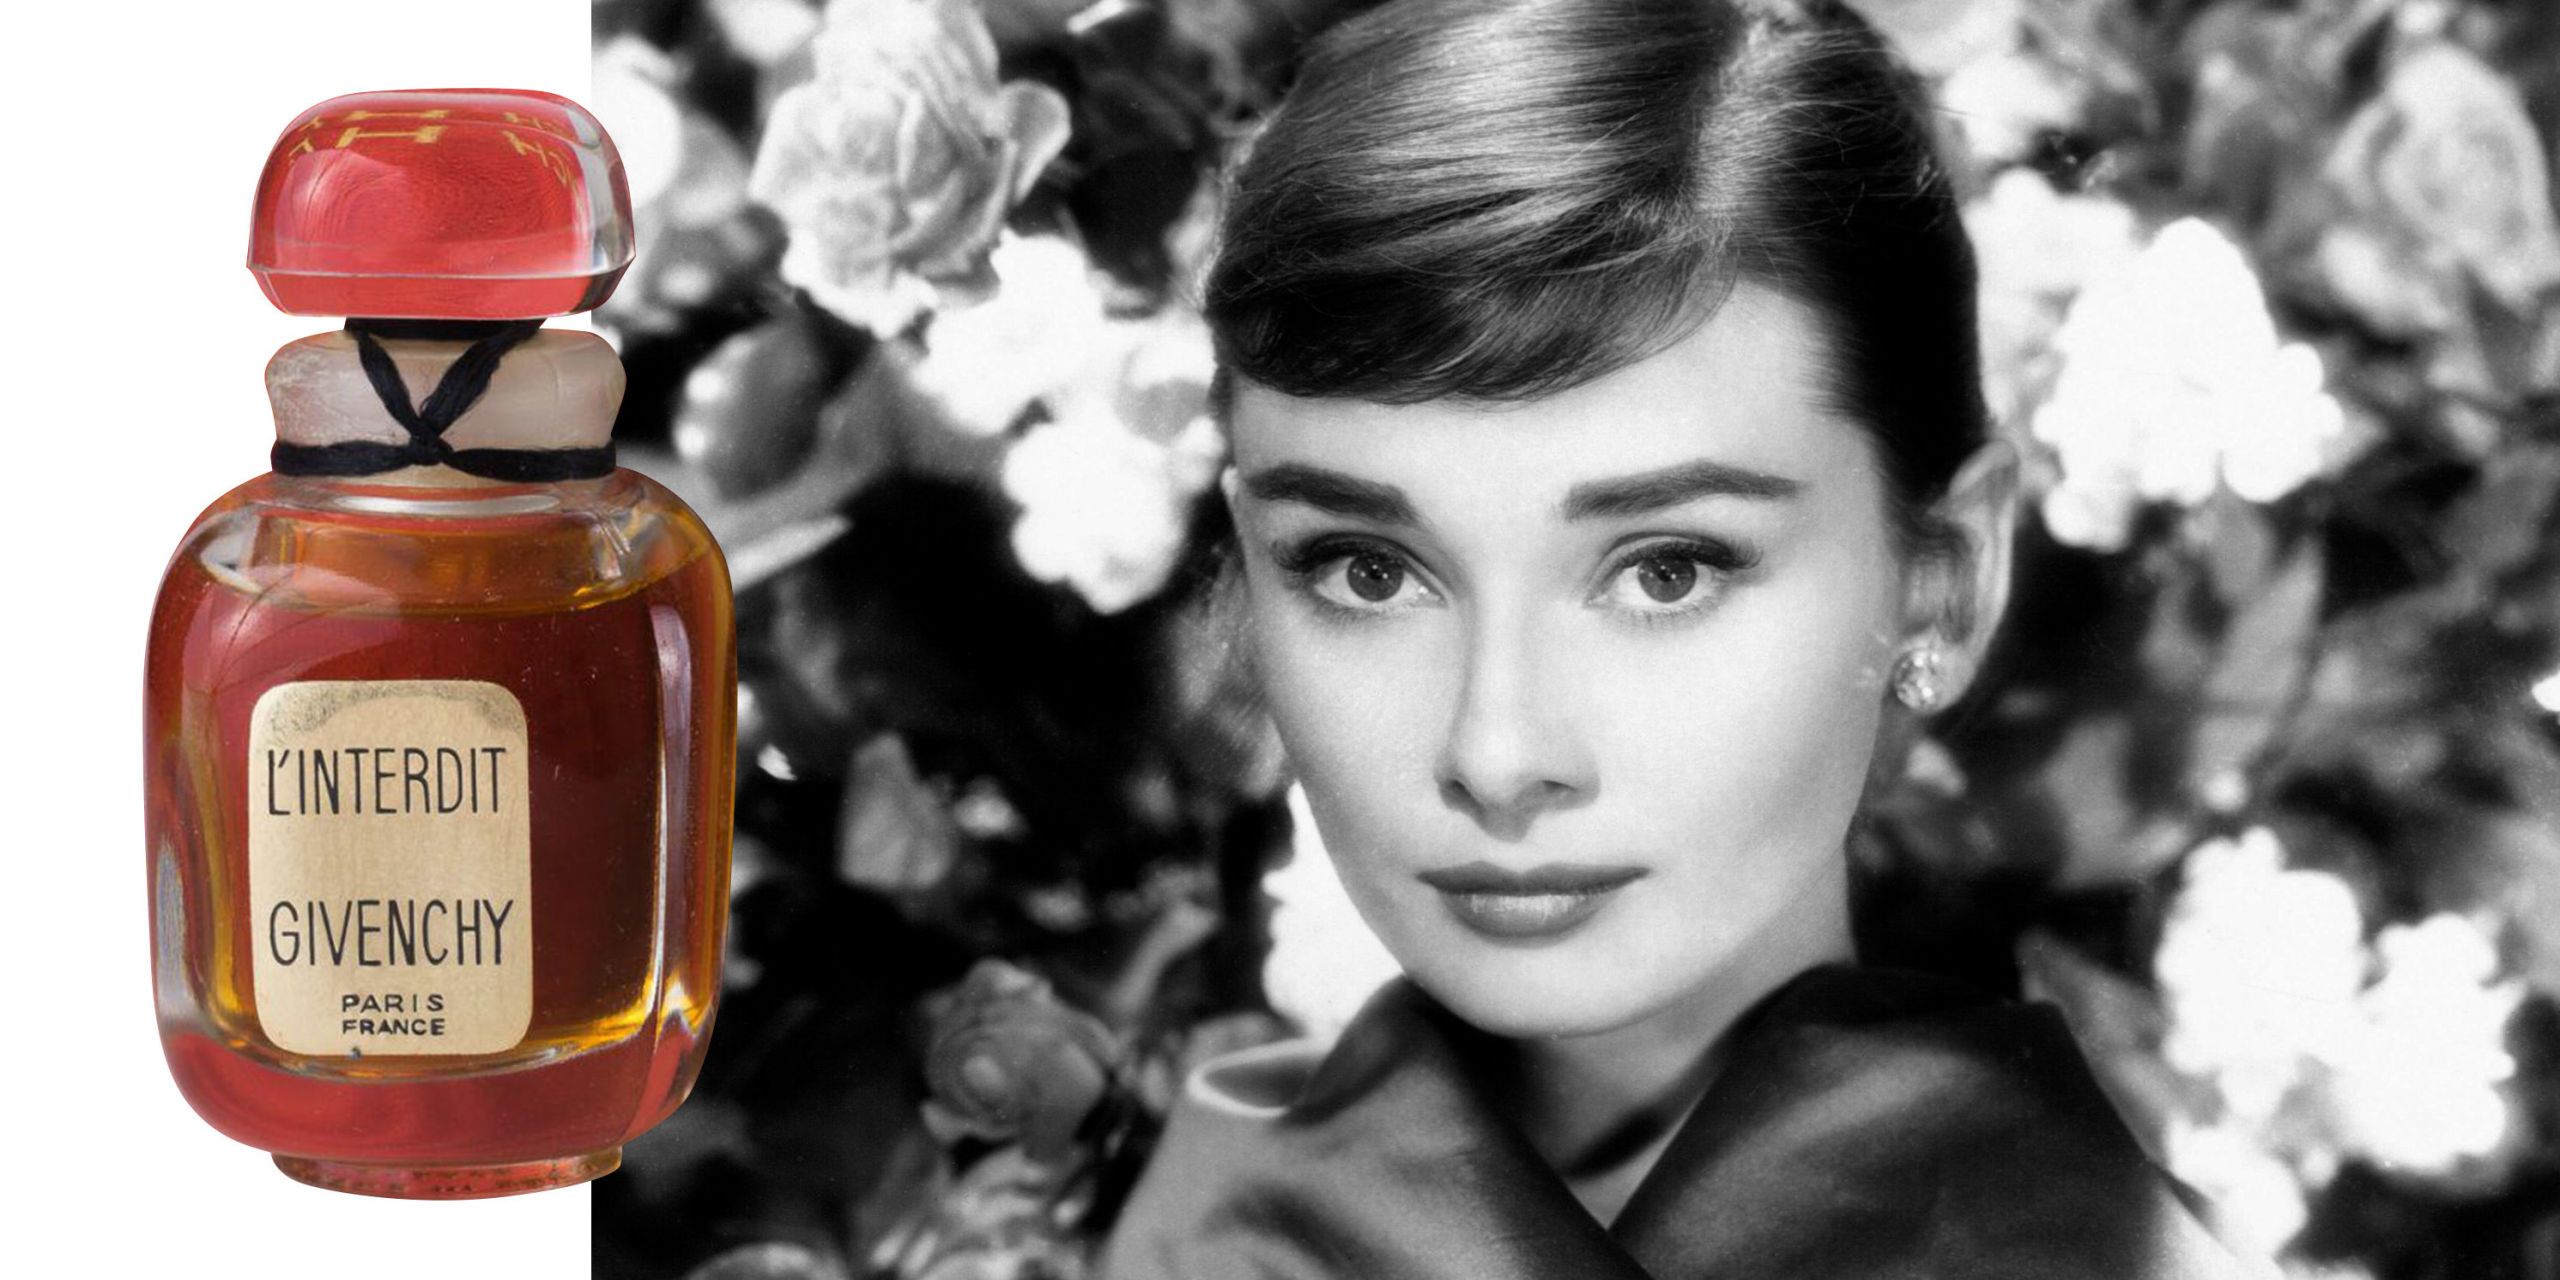 givenchy perfume made for audrey hepburn